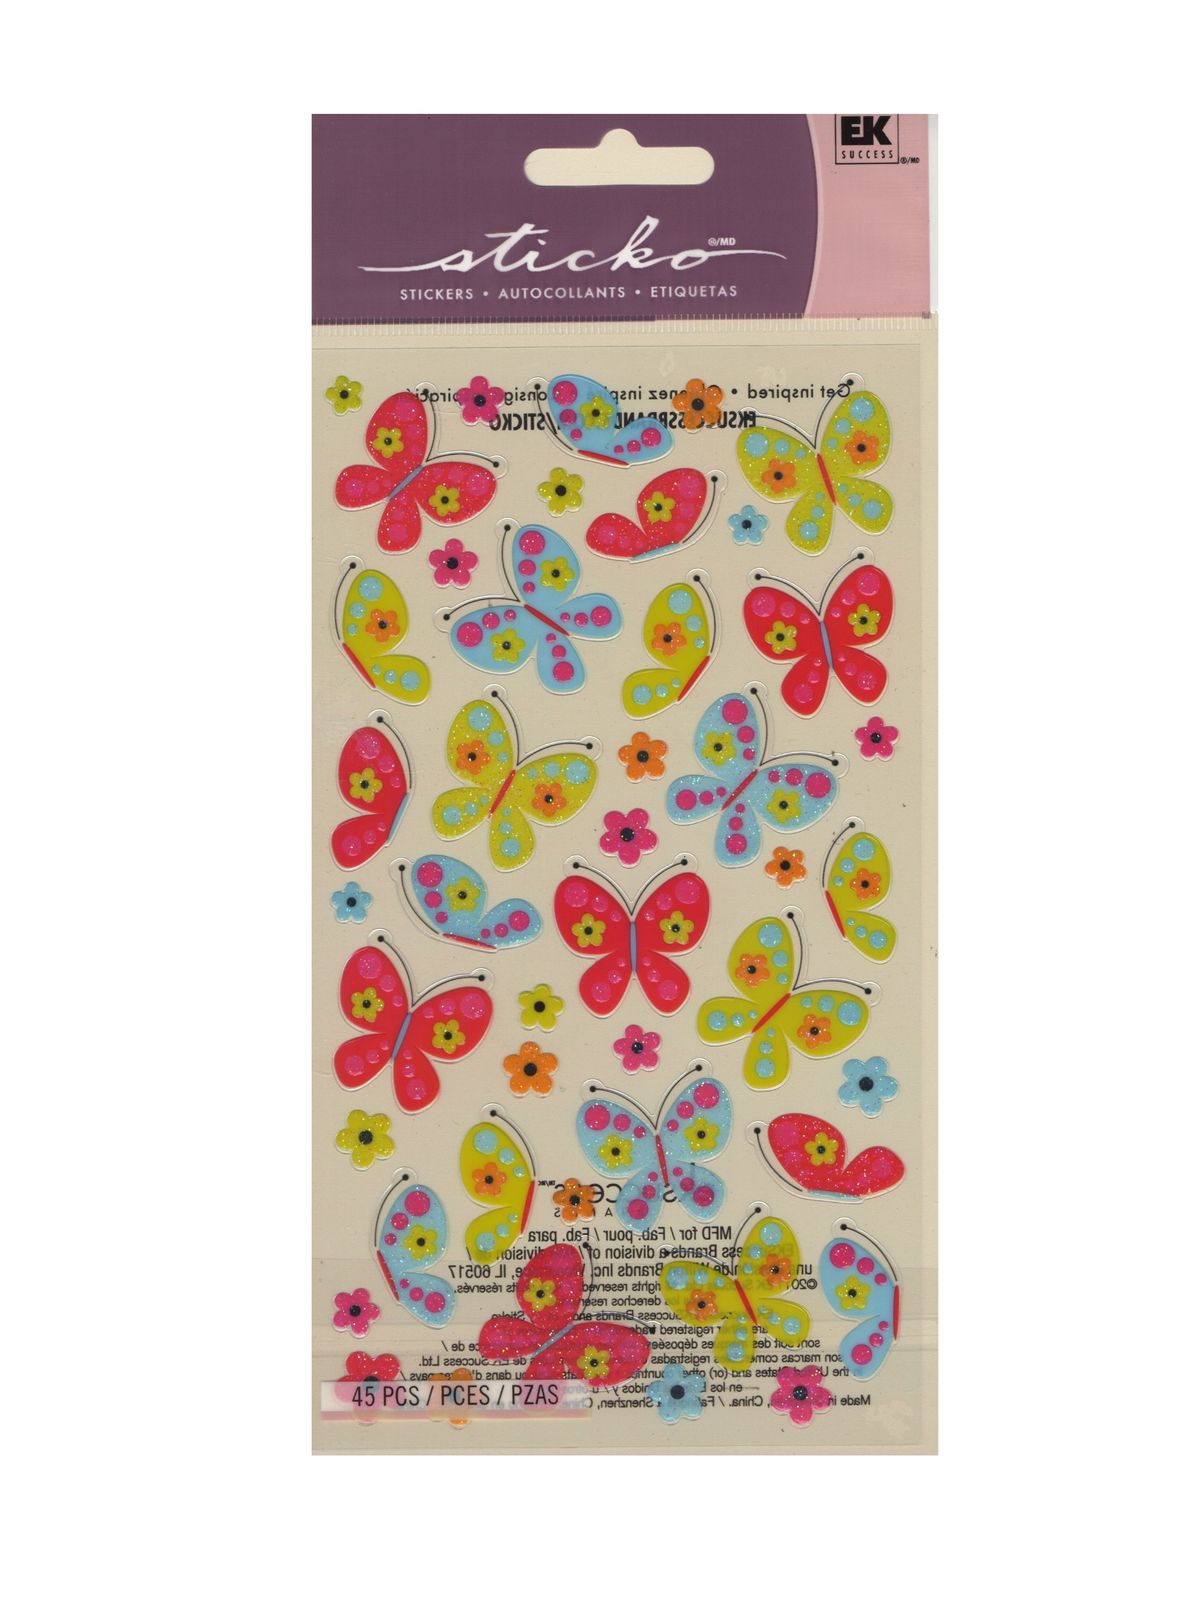 Classic Stickers Acetate Spicy Butterflies 39 Pieces